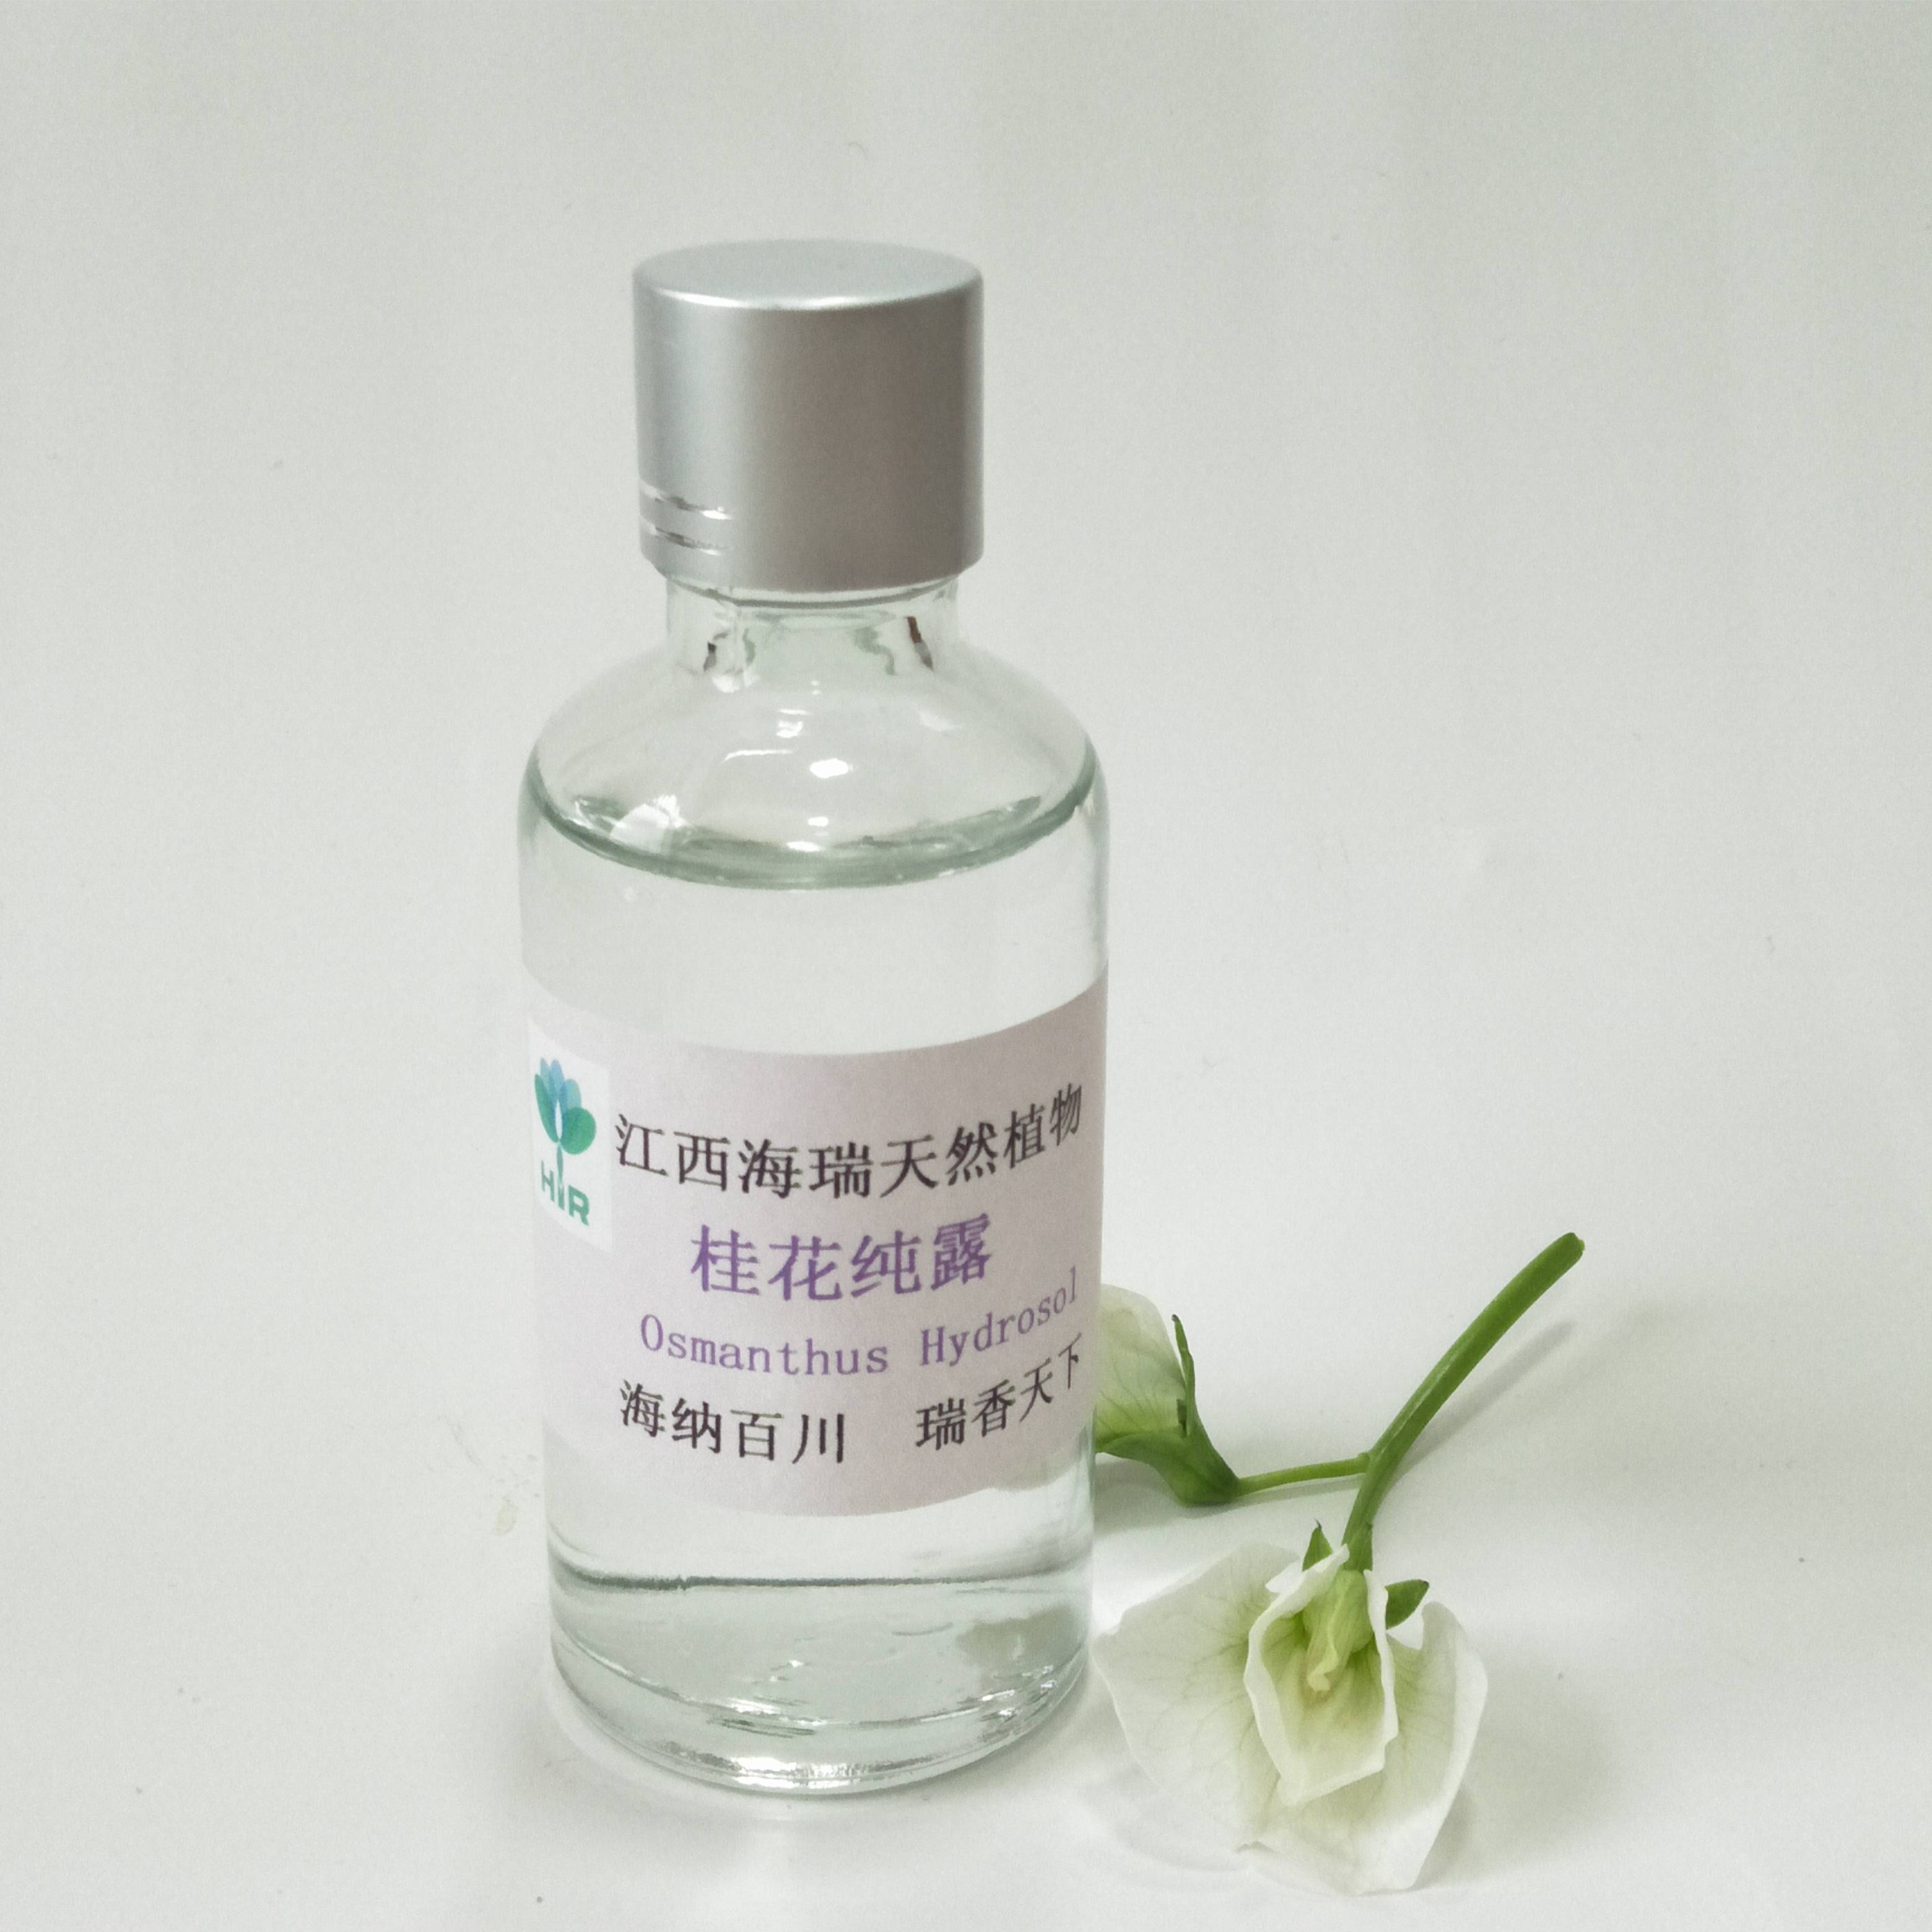 Osmanthus hydrosol contain flower smell